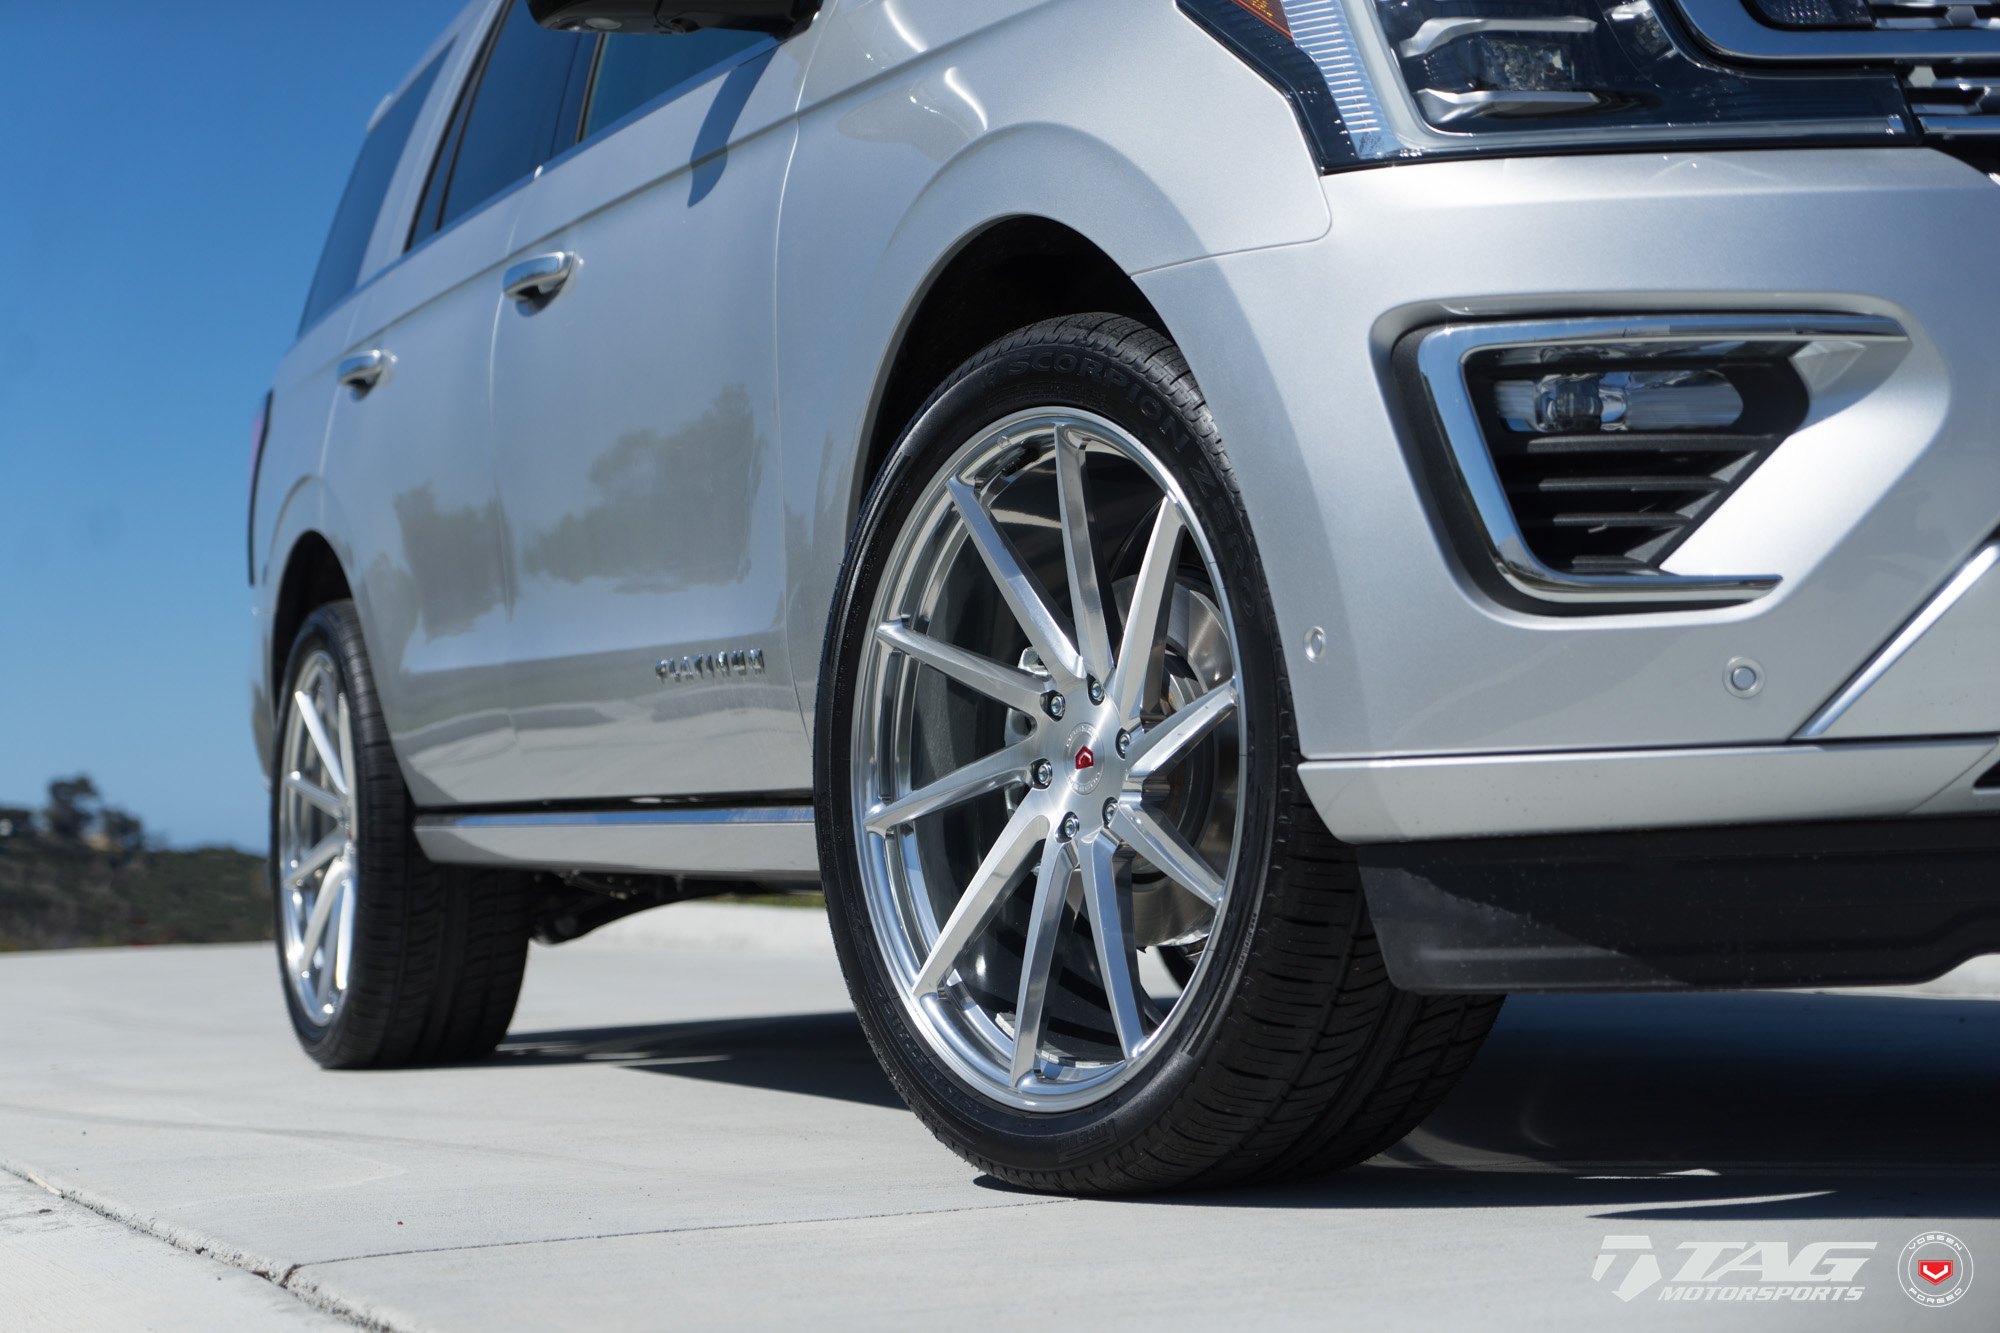 Aftermarket Front Bumper on Silver Ford Expedition - Photo by Vossen